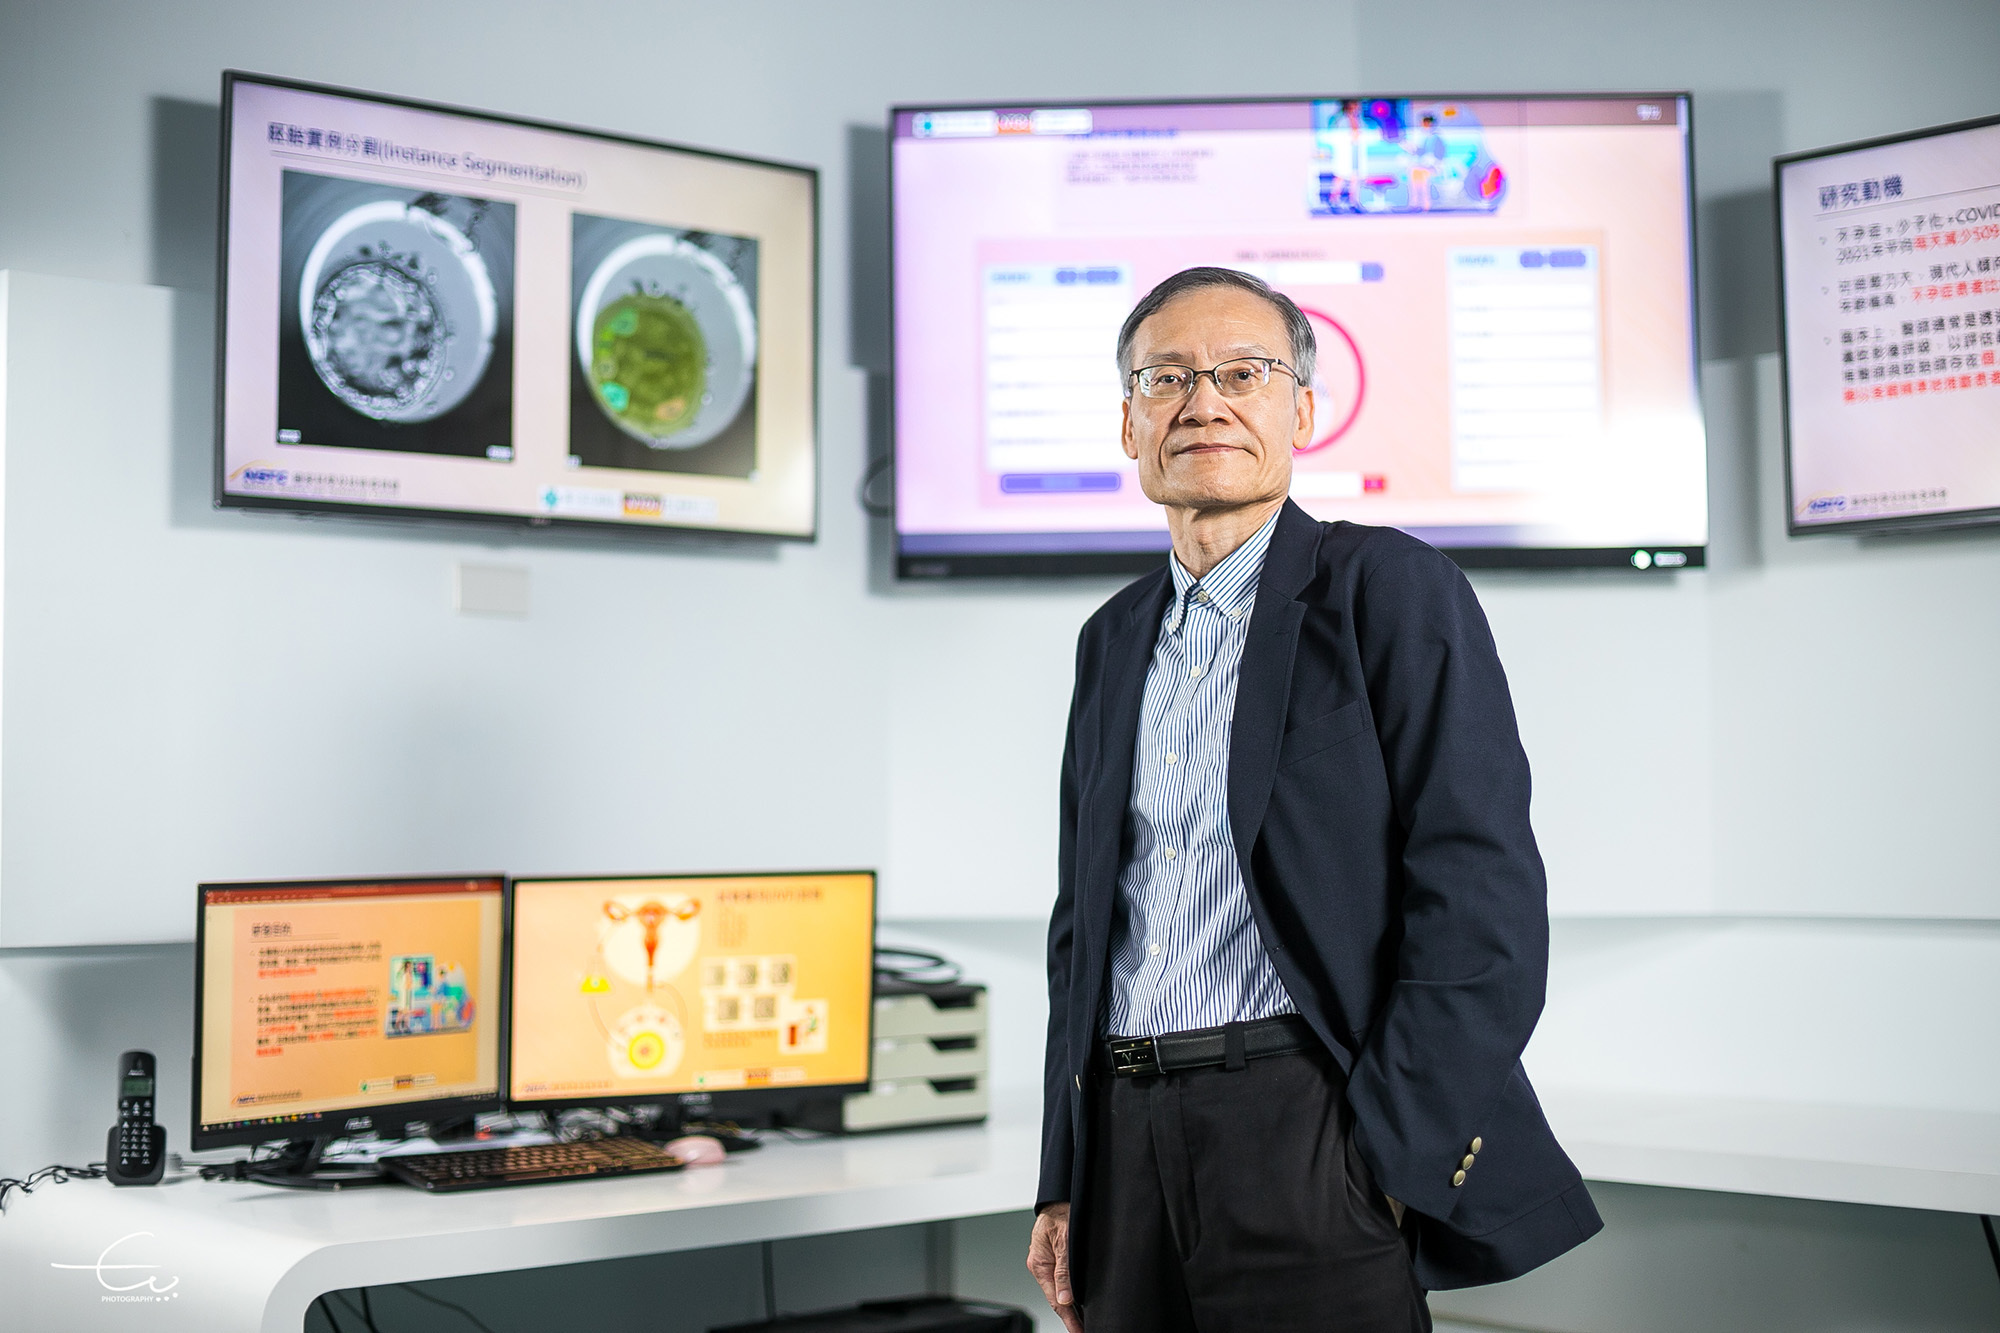 Director of NTOU AI Research Center Jung-Hua Wang deveploped AI recognition system and user Interface thereof for assisted prediction of pregnancy rate after blastocyst transfer, winning "2022 International Smart Healthcare Summit" Excellence Award.